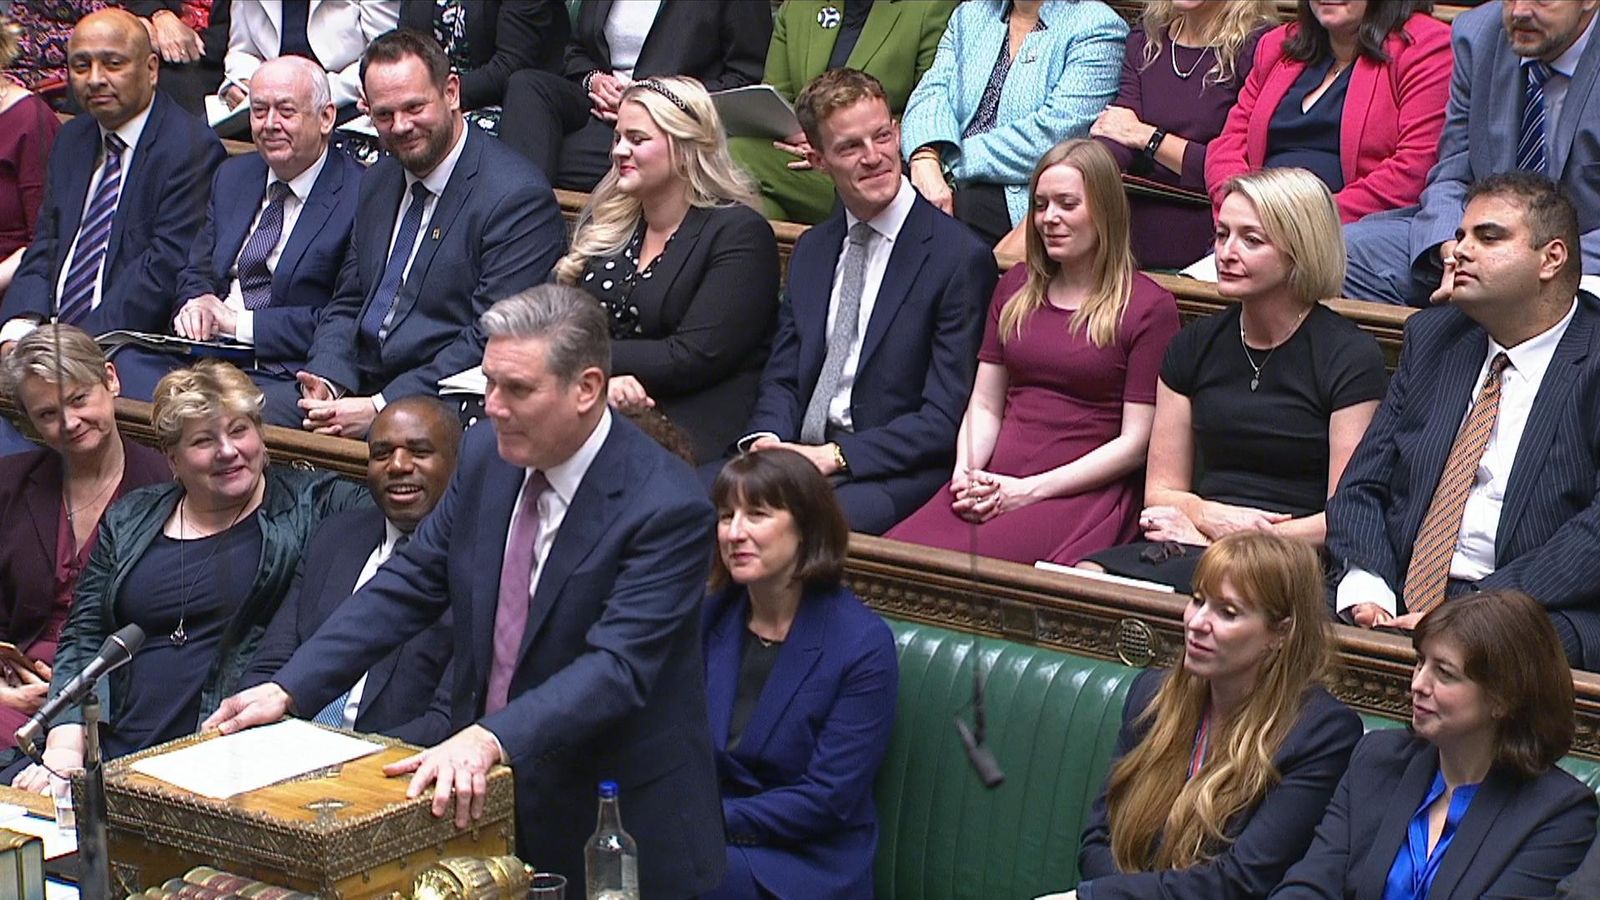 Sir Keir Starmer mocks Tories at PMQs over by-election losses - as Sunak defends 'long-term decisions'